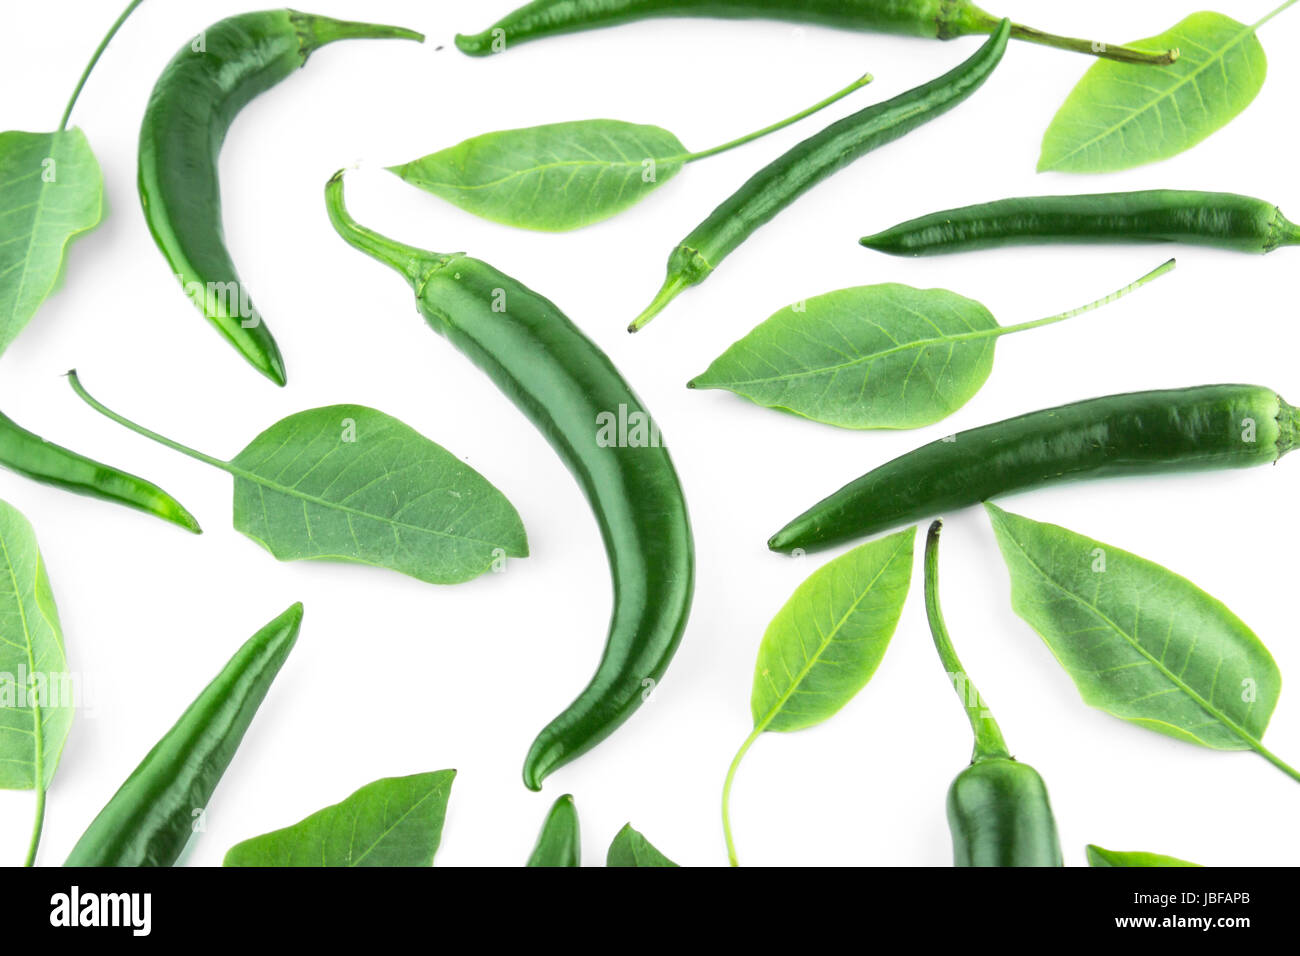 green hot chili pepper with leaves on a white background Stock Photo